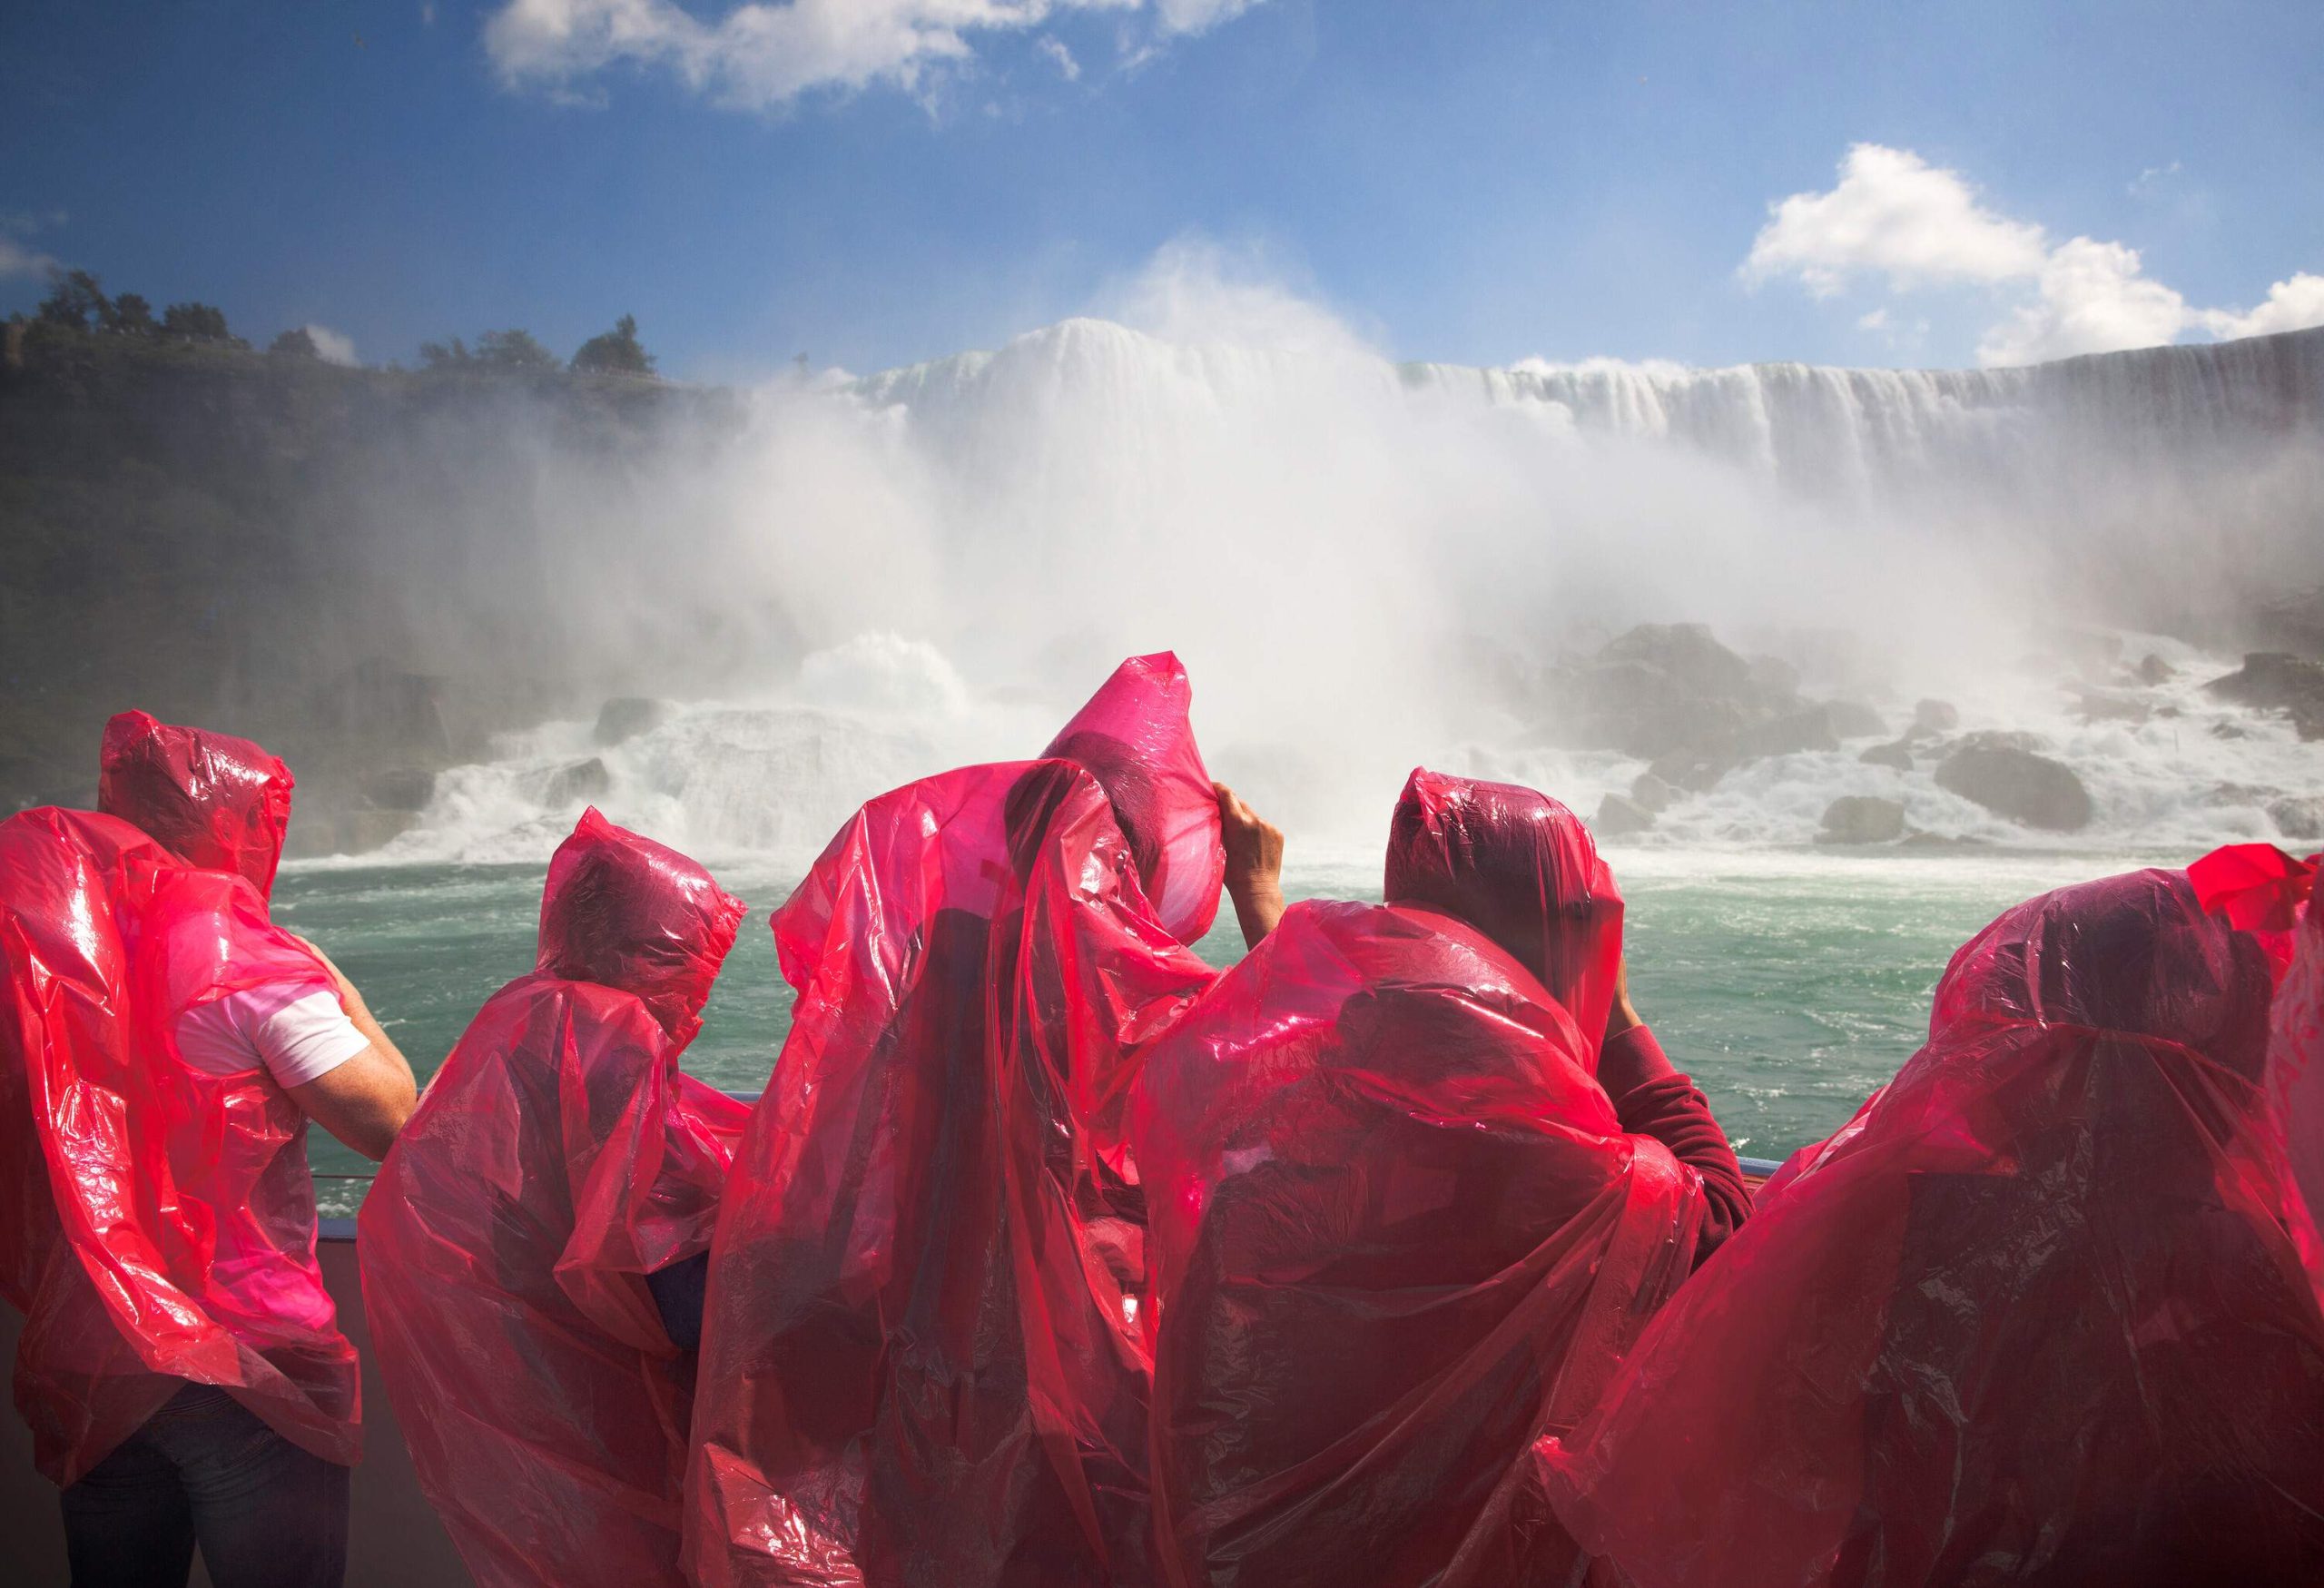 A group of individuals, clad in vibrant red plastic attire, enthusiastically gather around the majestic Niagara Falls.